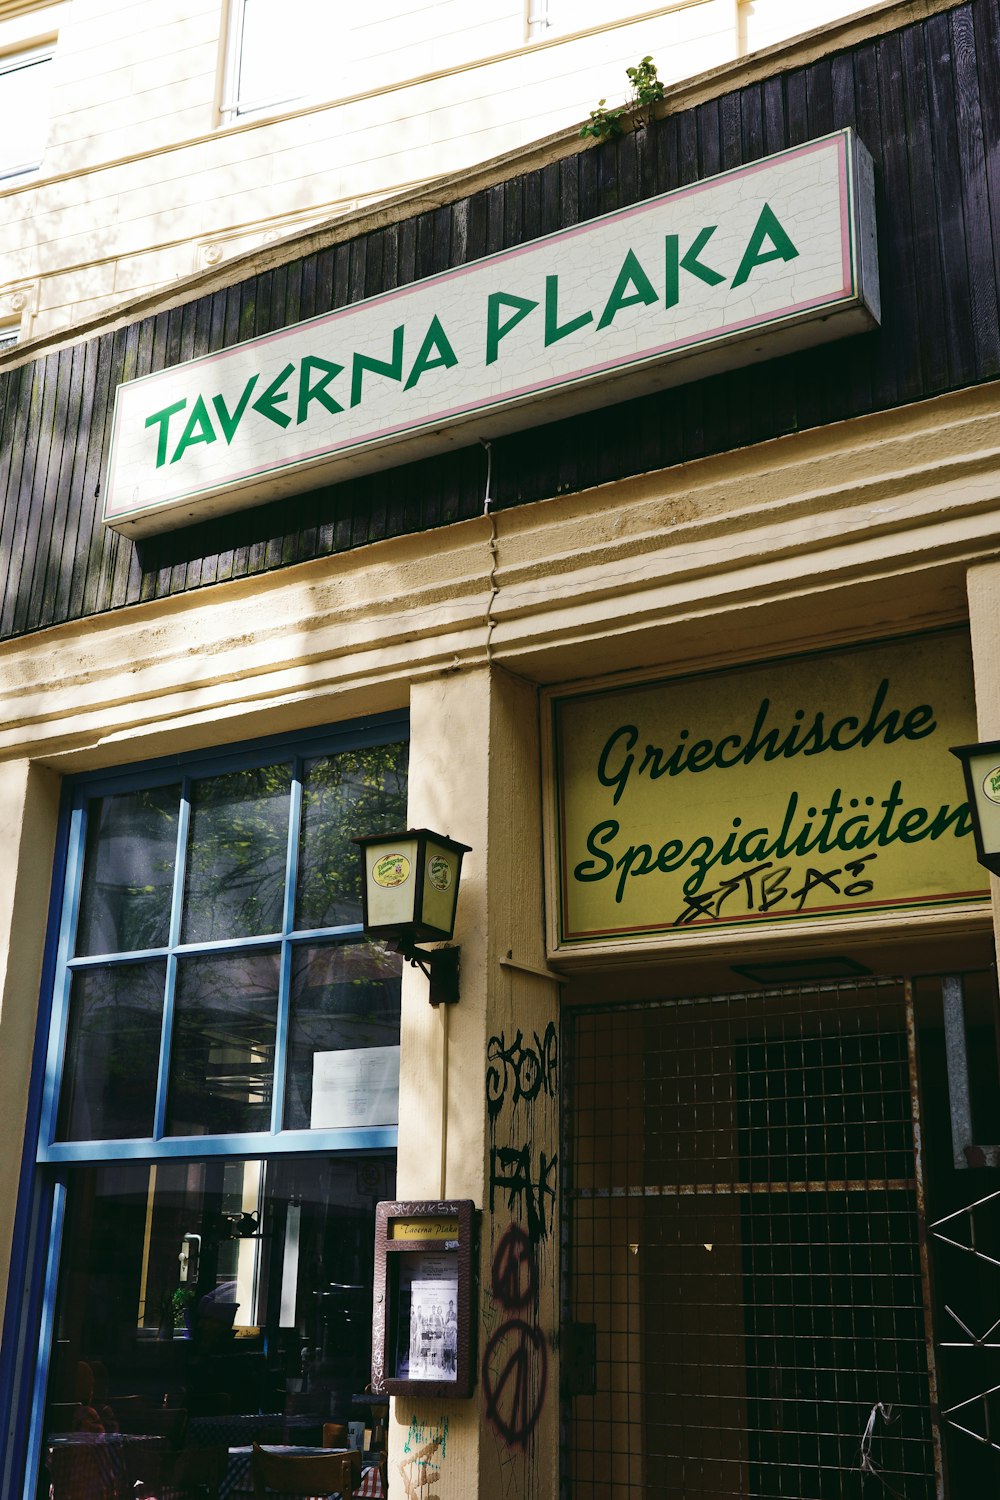 there is a sign that says tavern plaka on the front of the building